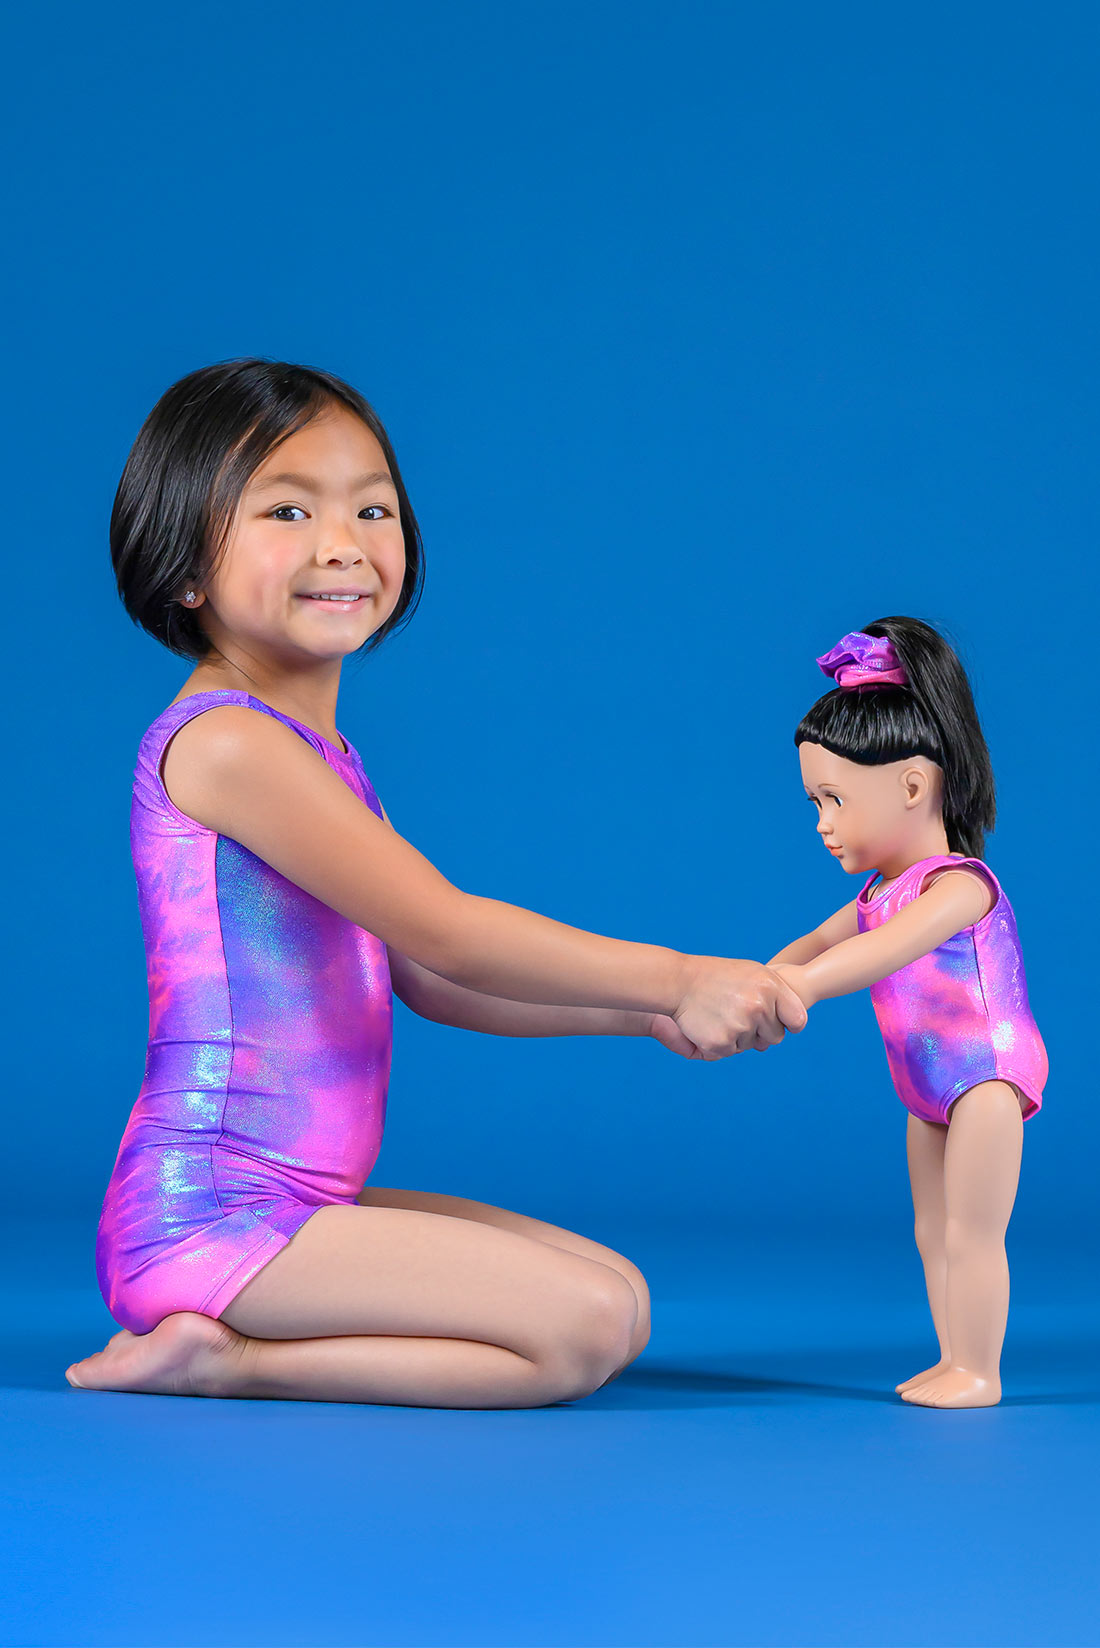 A young model holds hands with a doll wearing a shiny pink gymnastics leotard that matches her unitard by Destira, 2023